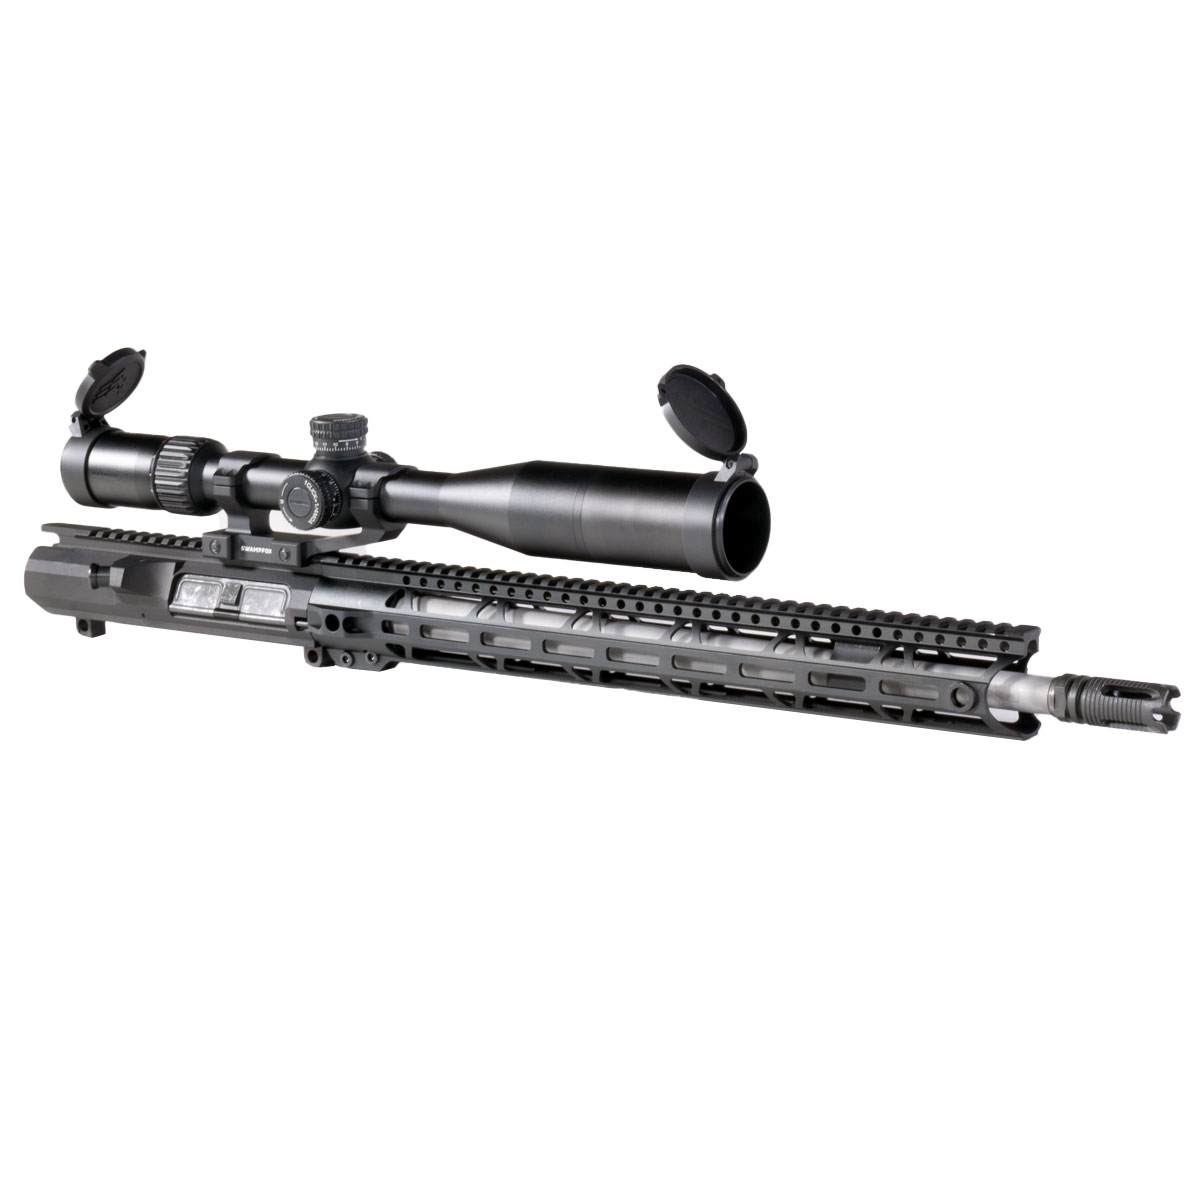 DD 'Crossbow' 18-inch LR-308 .308 Win Stainless Rifle Upper Build Kit